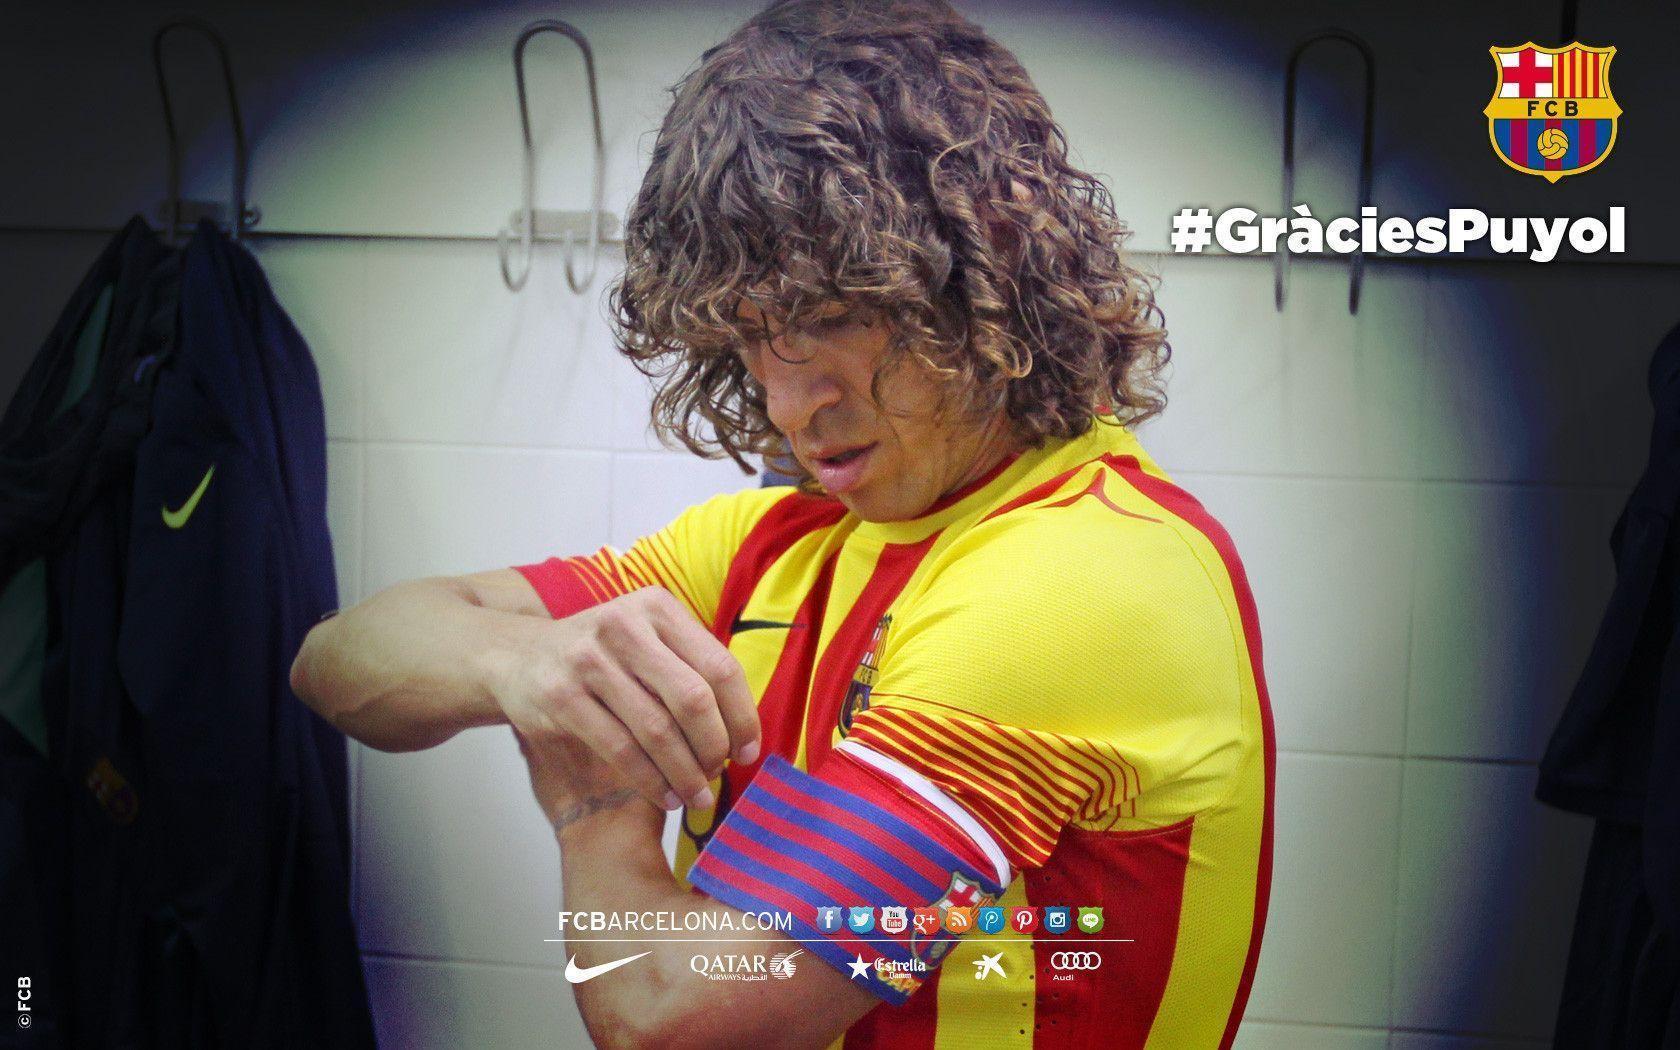 Five Carles Puyol wallpaper for your computer